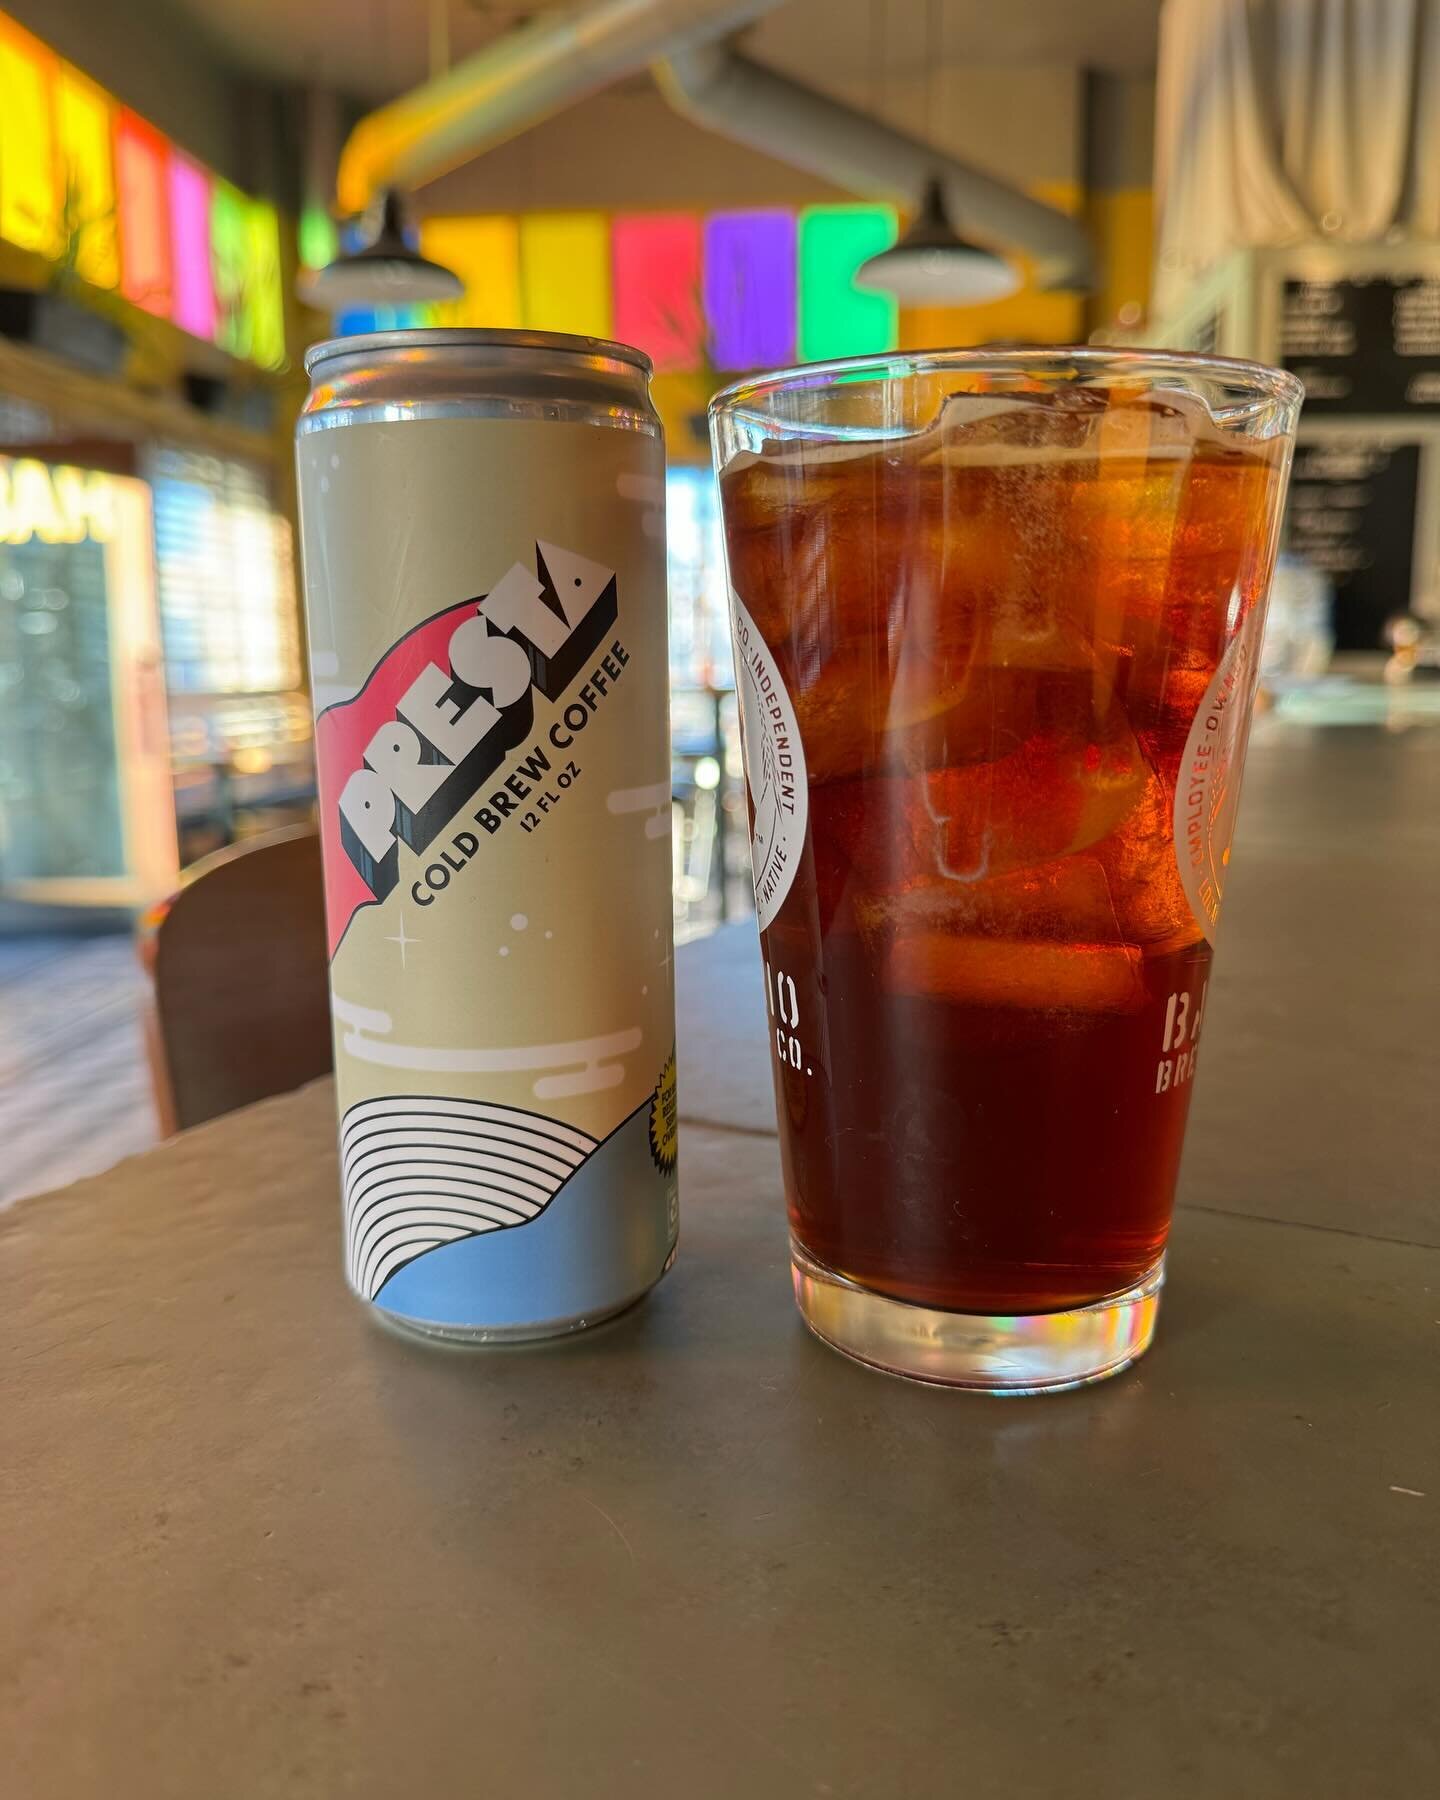 We&rsquo;re loving this @prestacoffee cold brew!
It also makes for a good espresso martini, just saying!
Love ya, mean it!
☮️❤️👽